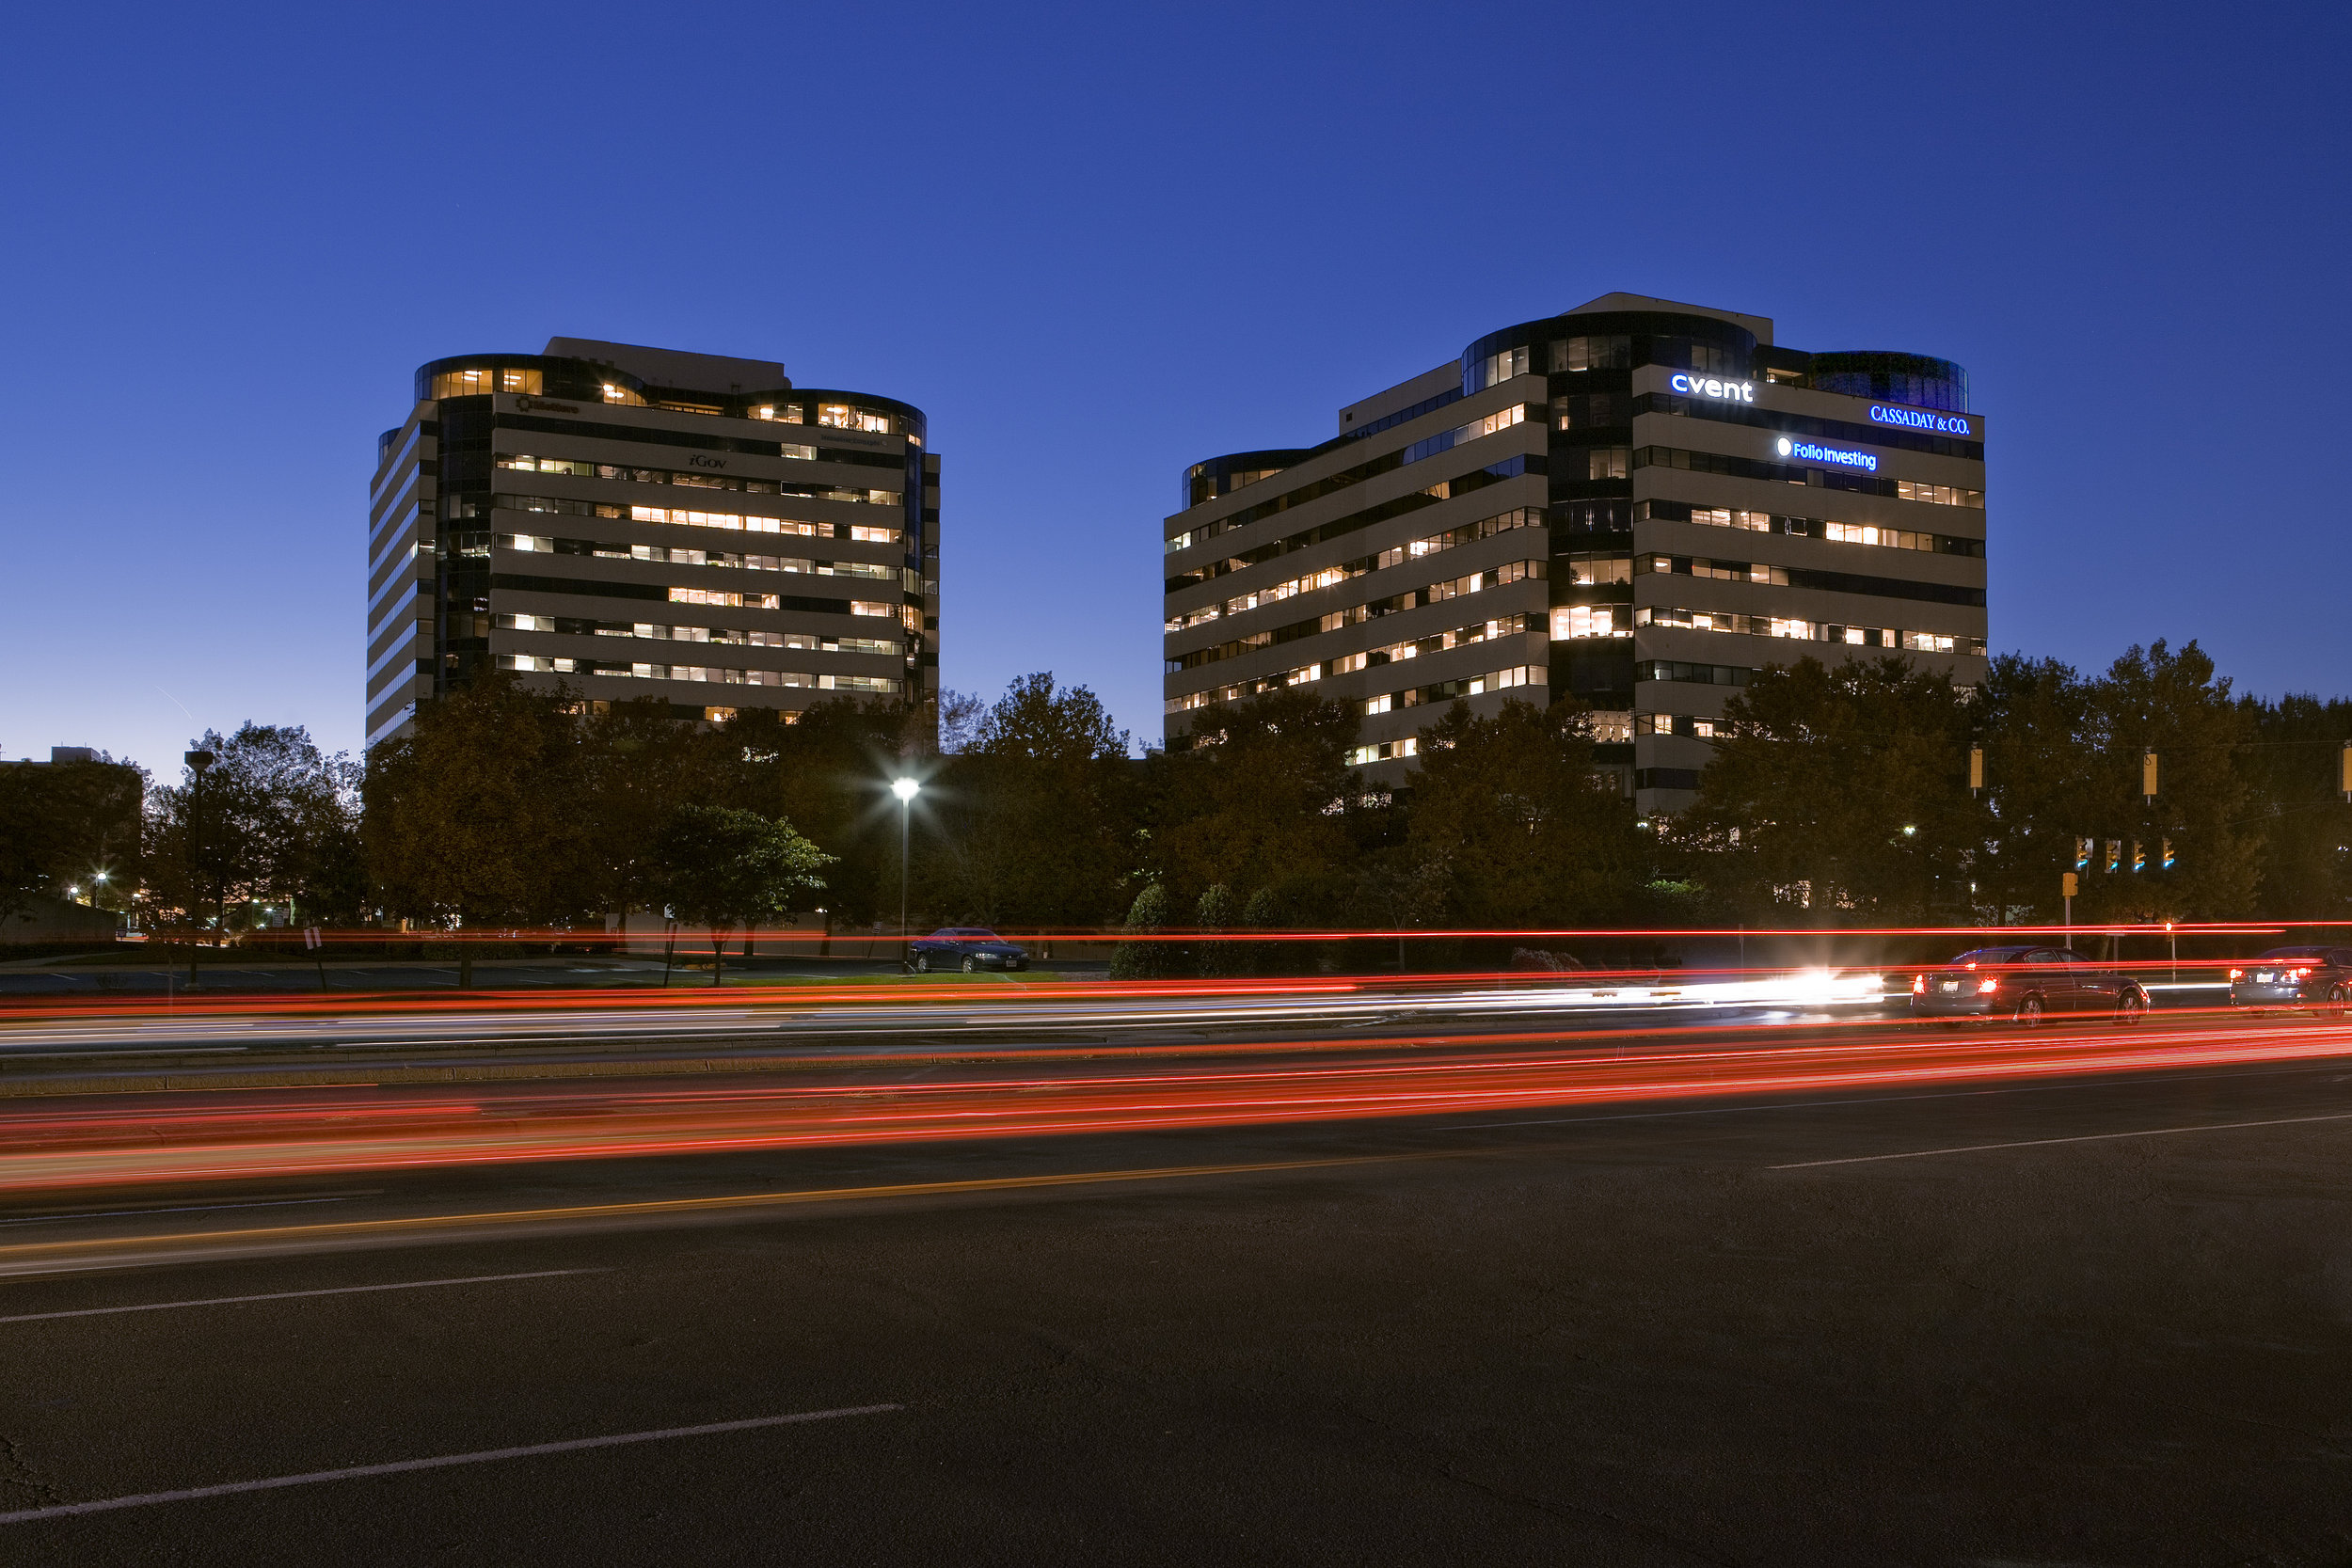 Velocis Purchases Greensboro Park in Tysons with Altus Realty